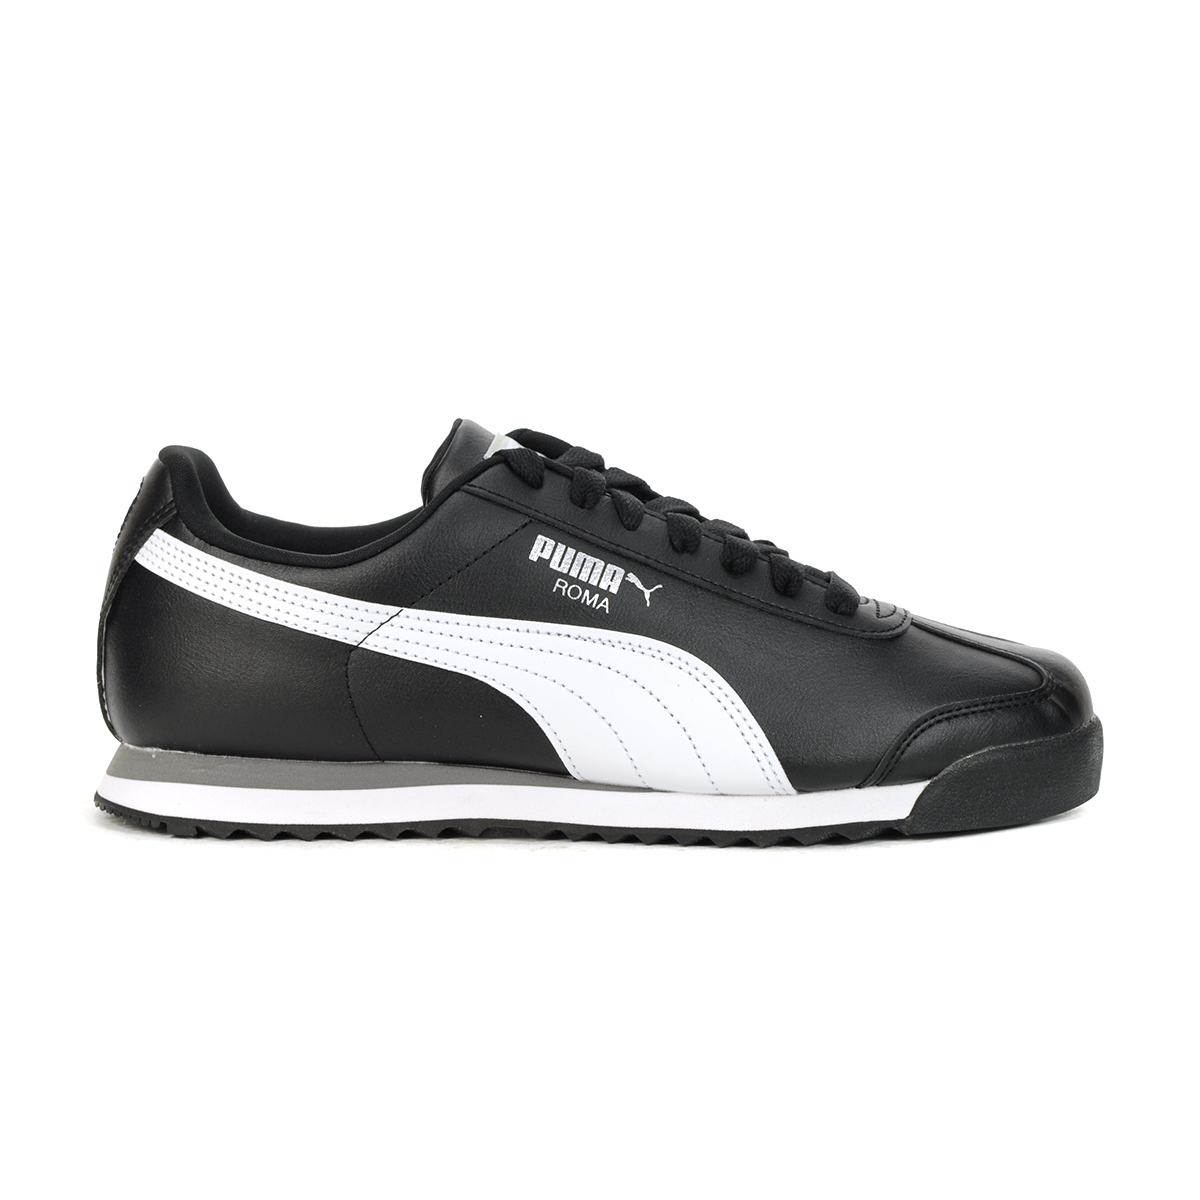 Puma Women's Silver Sneakers Size 8 M - Prime Shoes and More